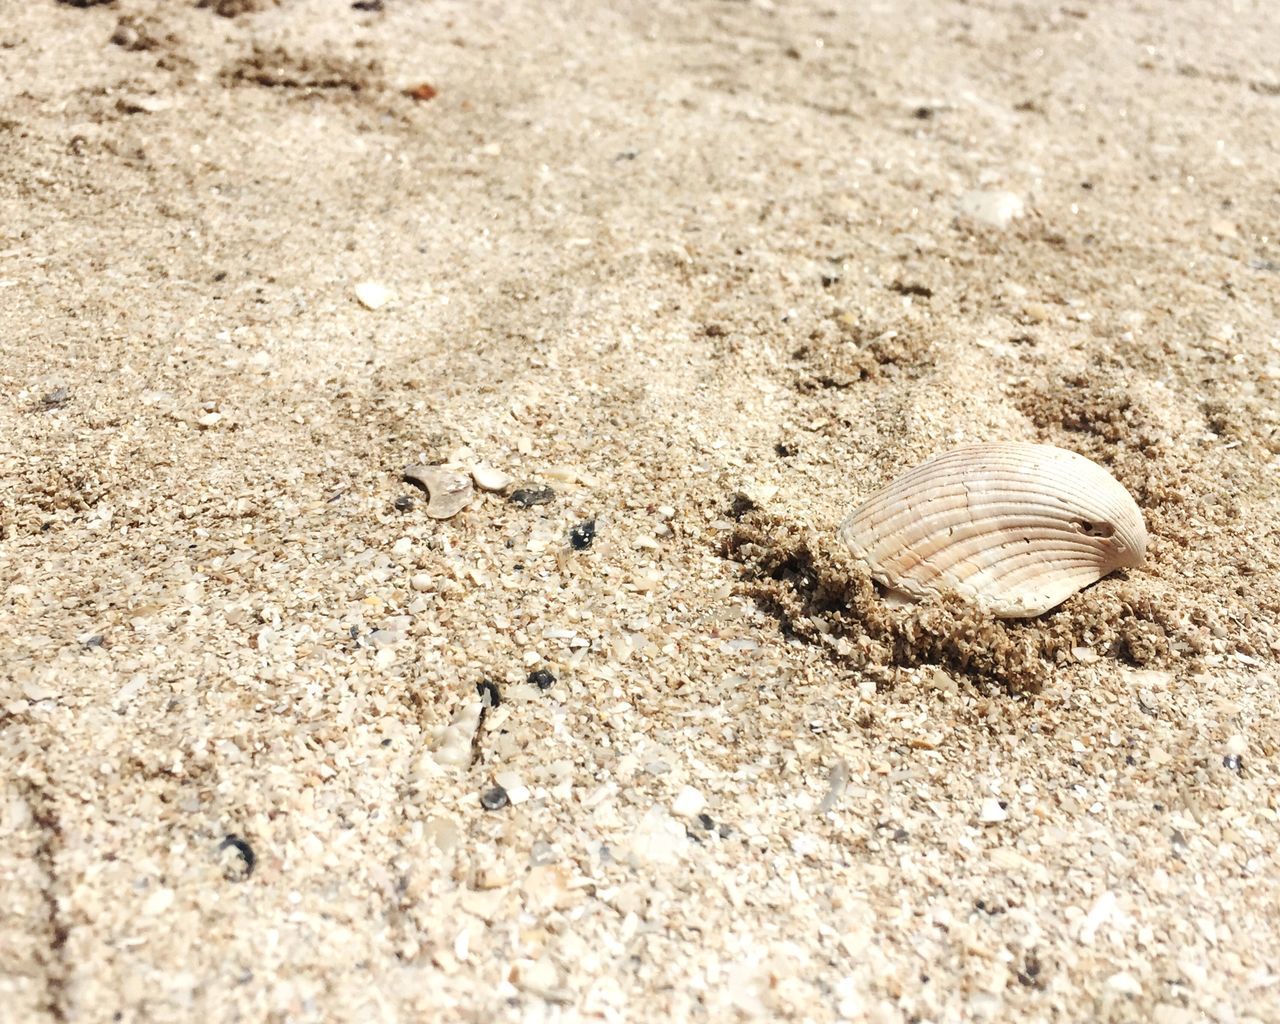 sand, animal shell, seashell, close-up, nature, shell, natural pattern, ground, day, outdoors, no people, full frame, backgrounds, elevated view